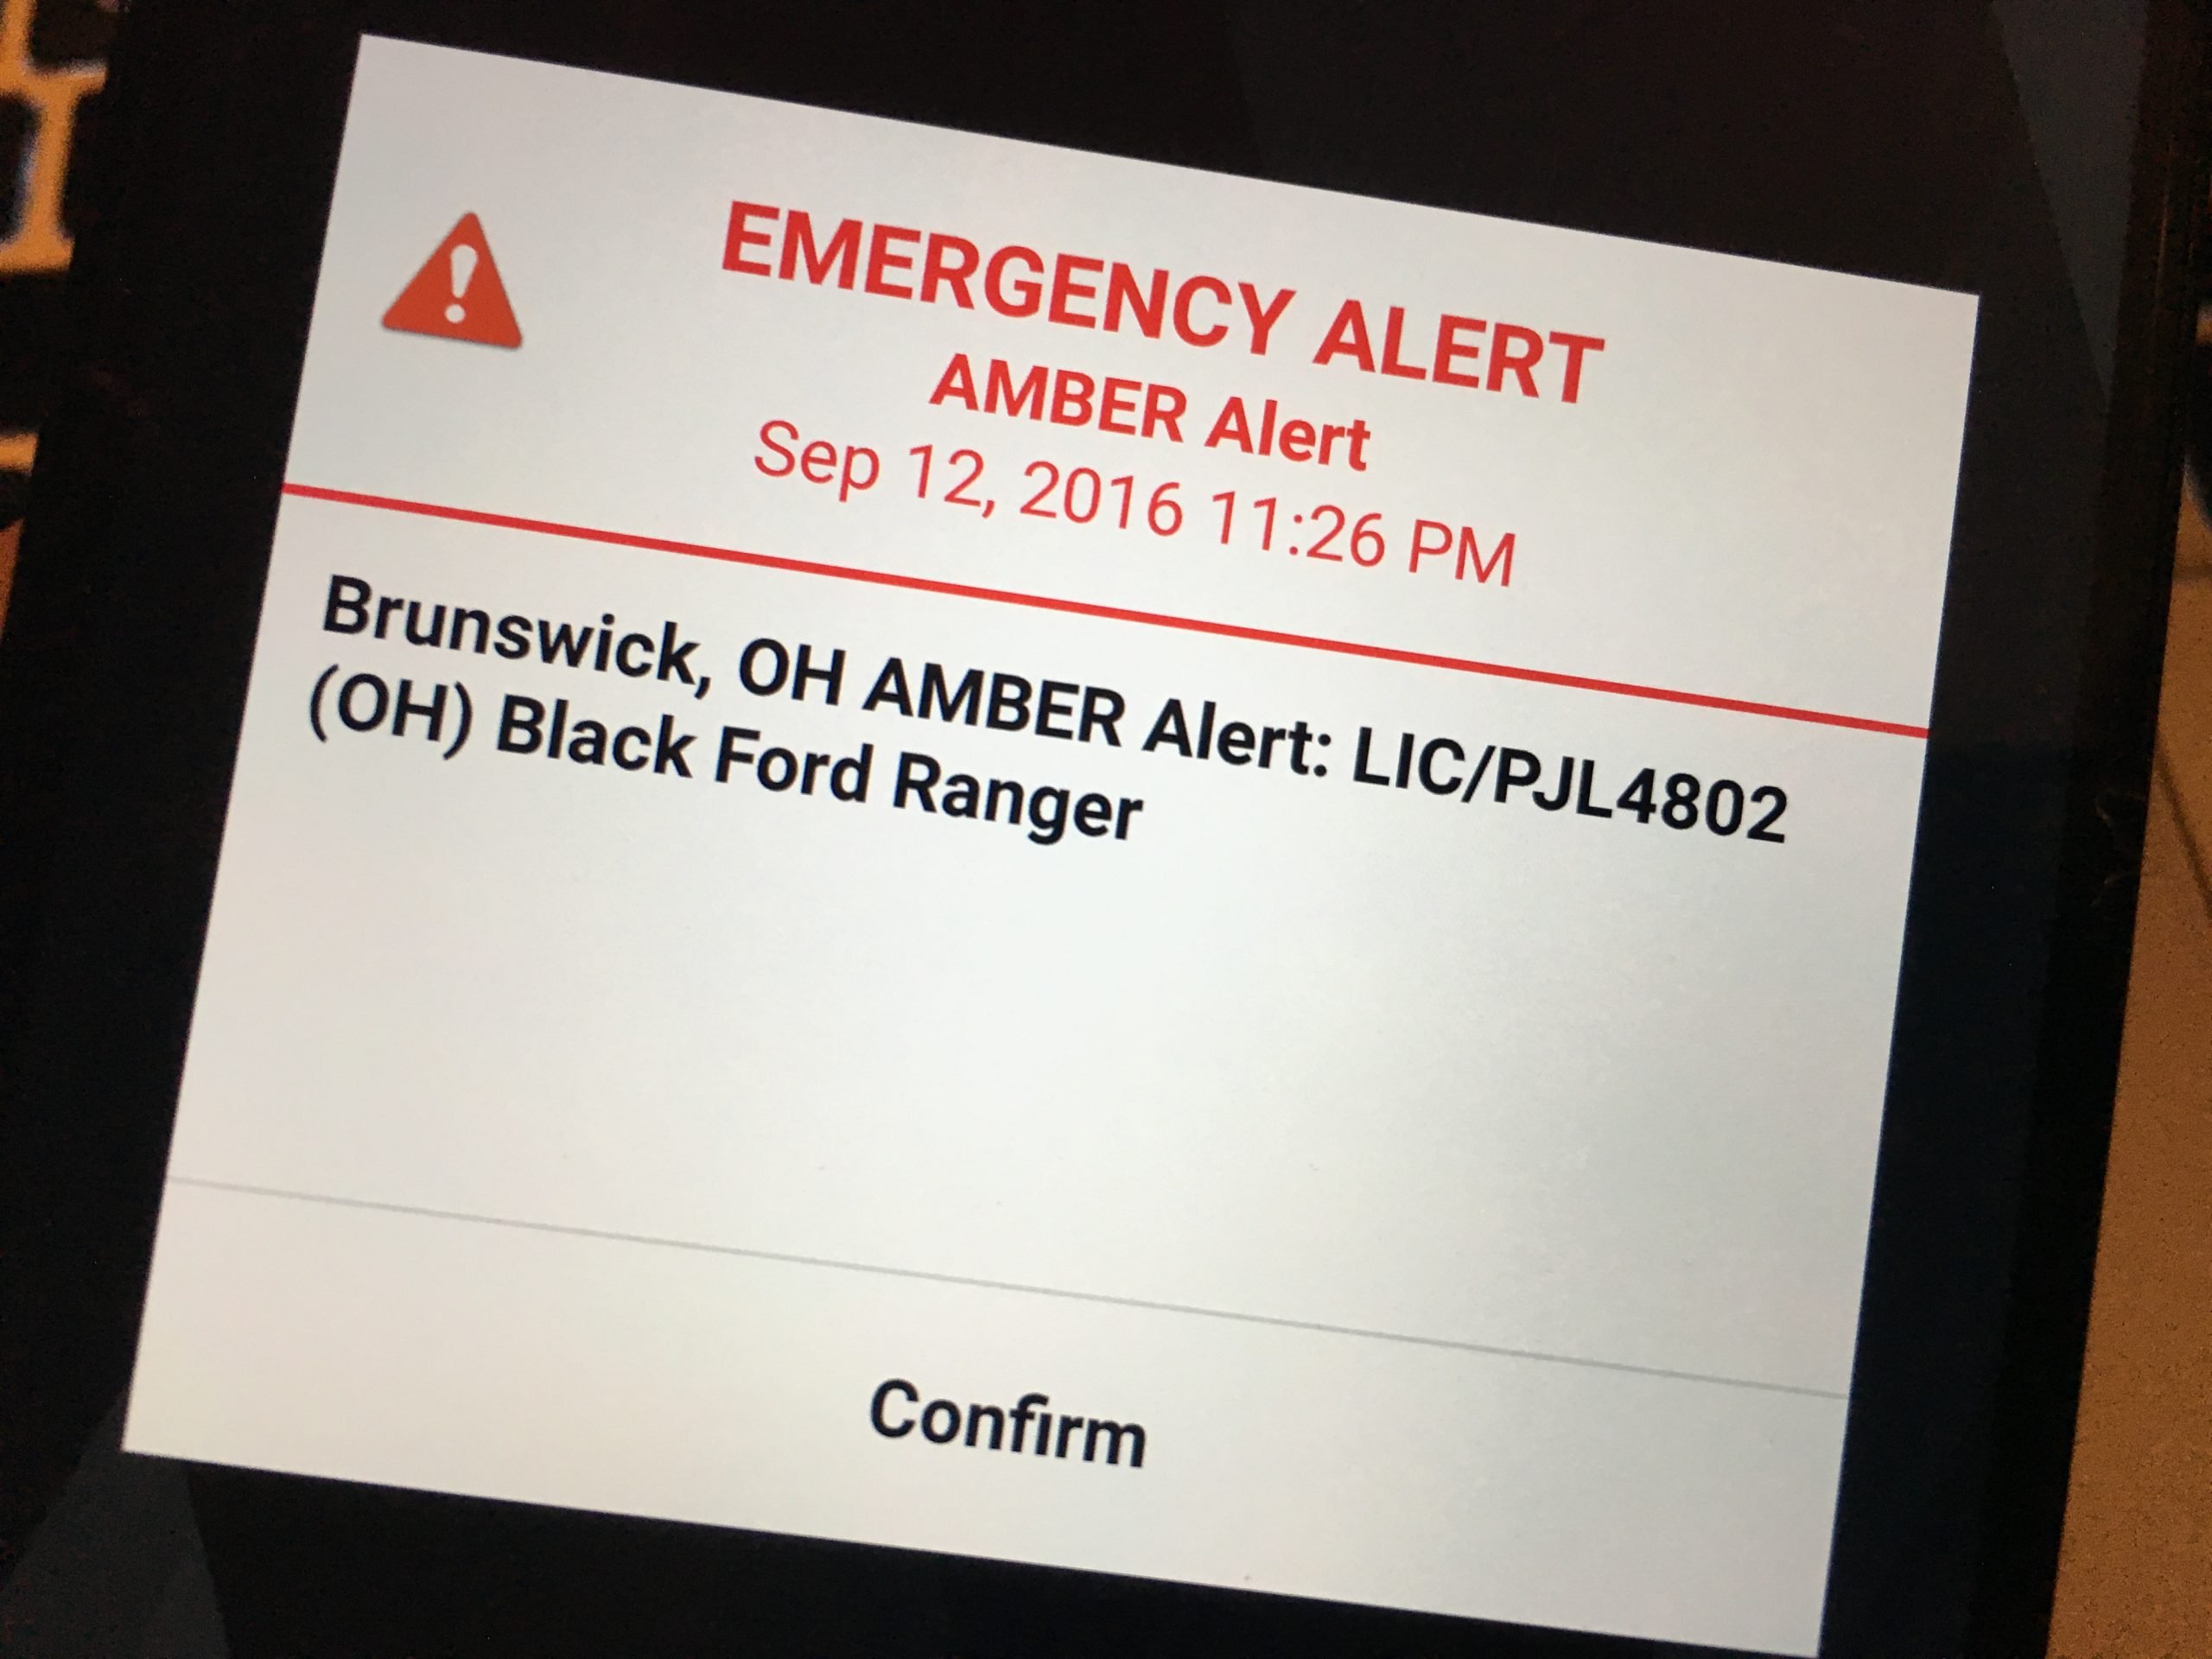 What to Do When You Get an Android or iPhone Amber Alert